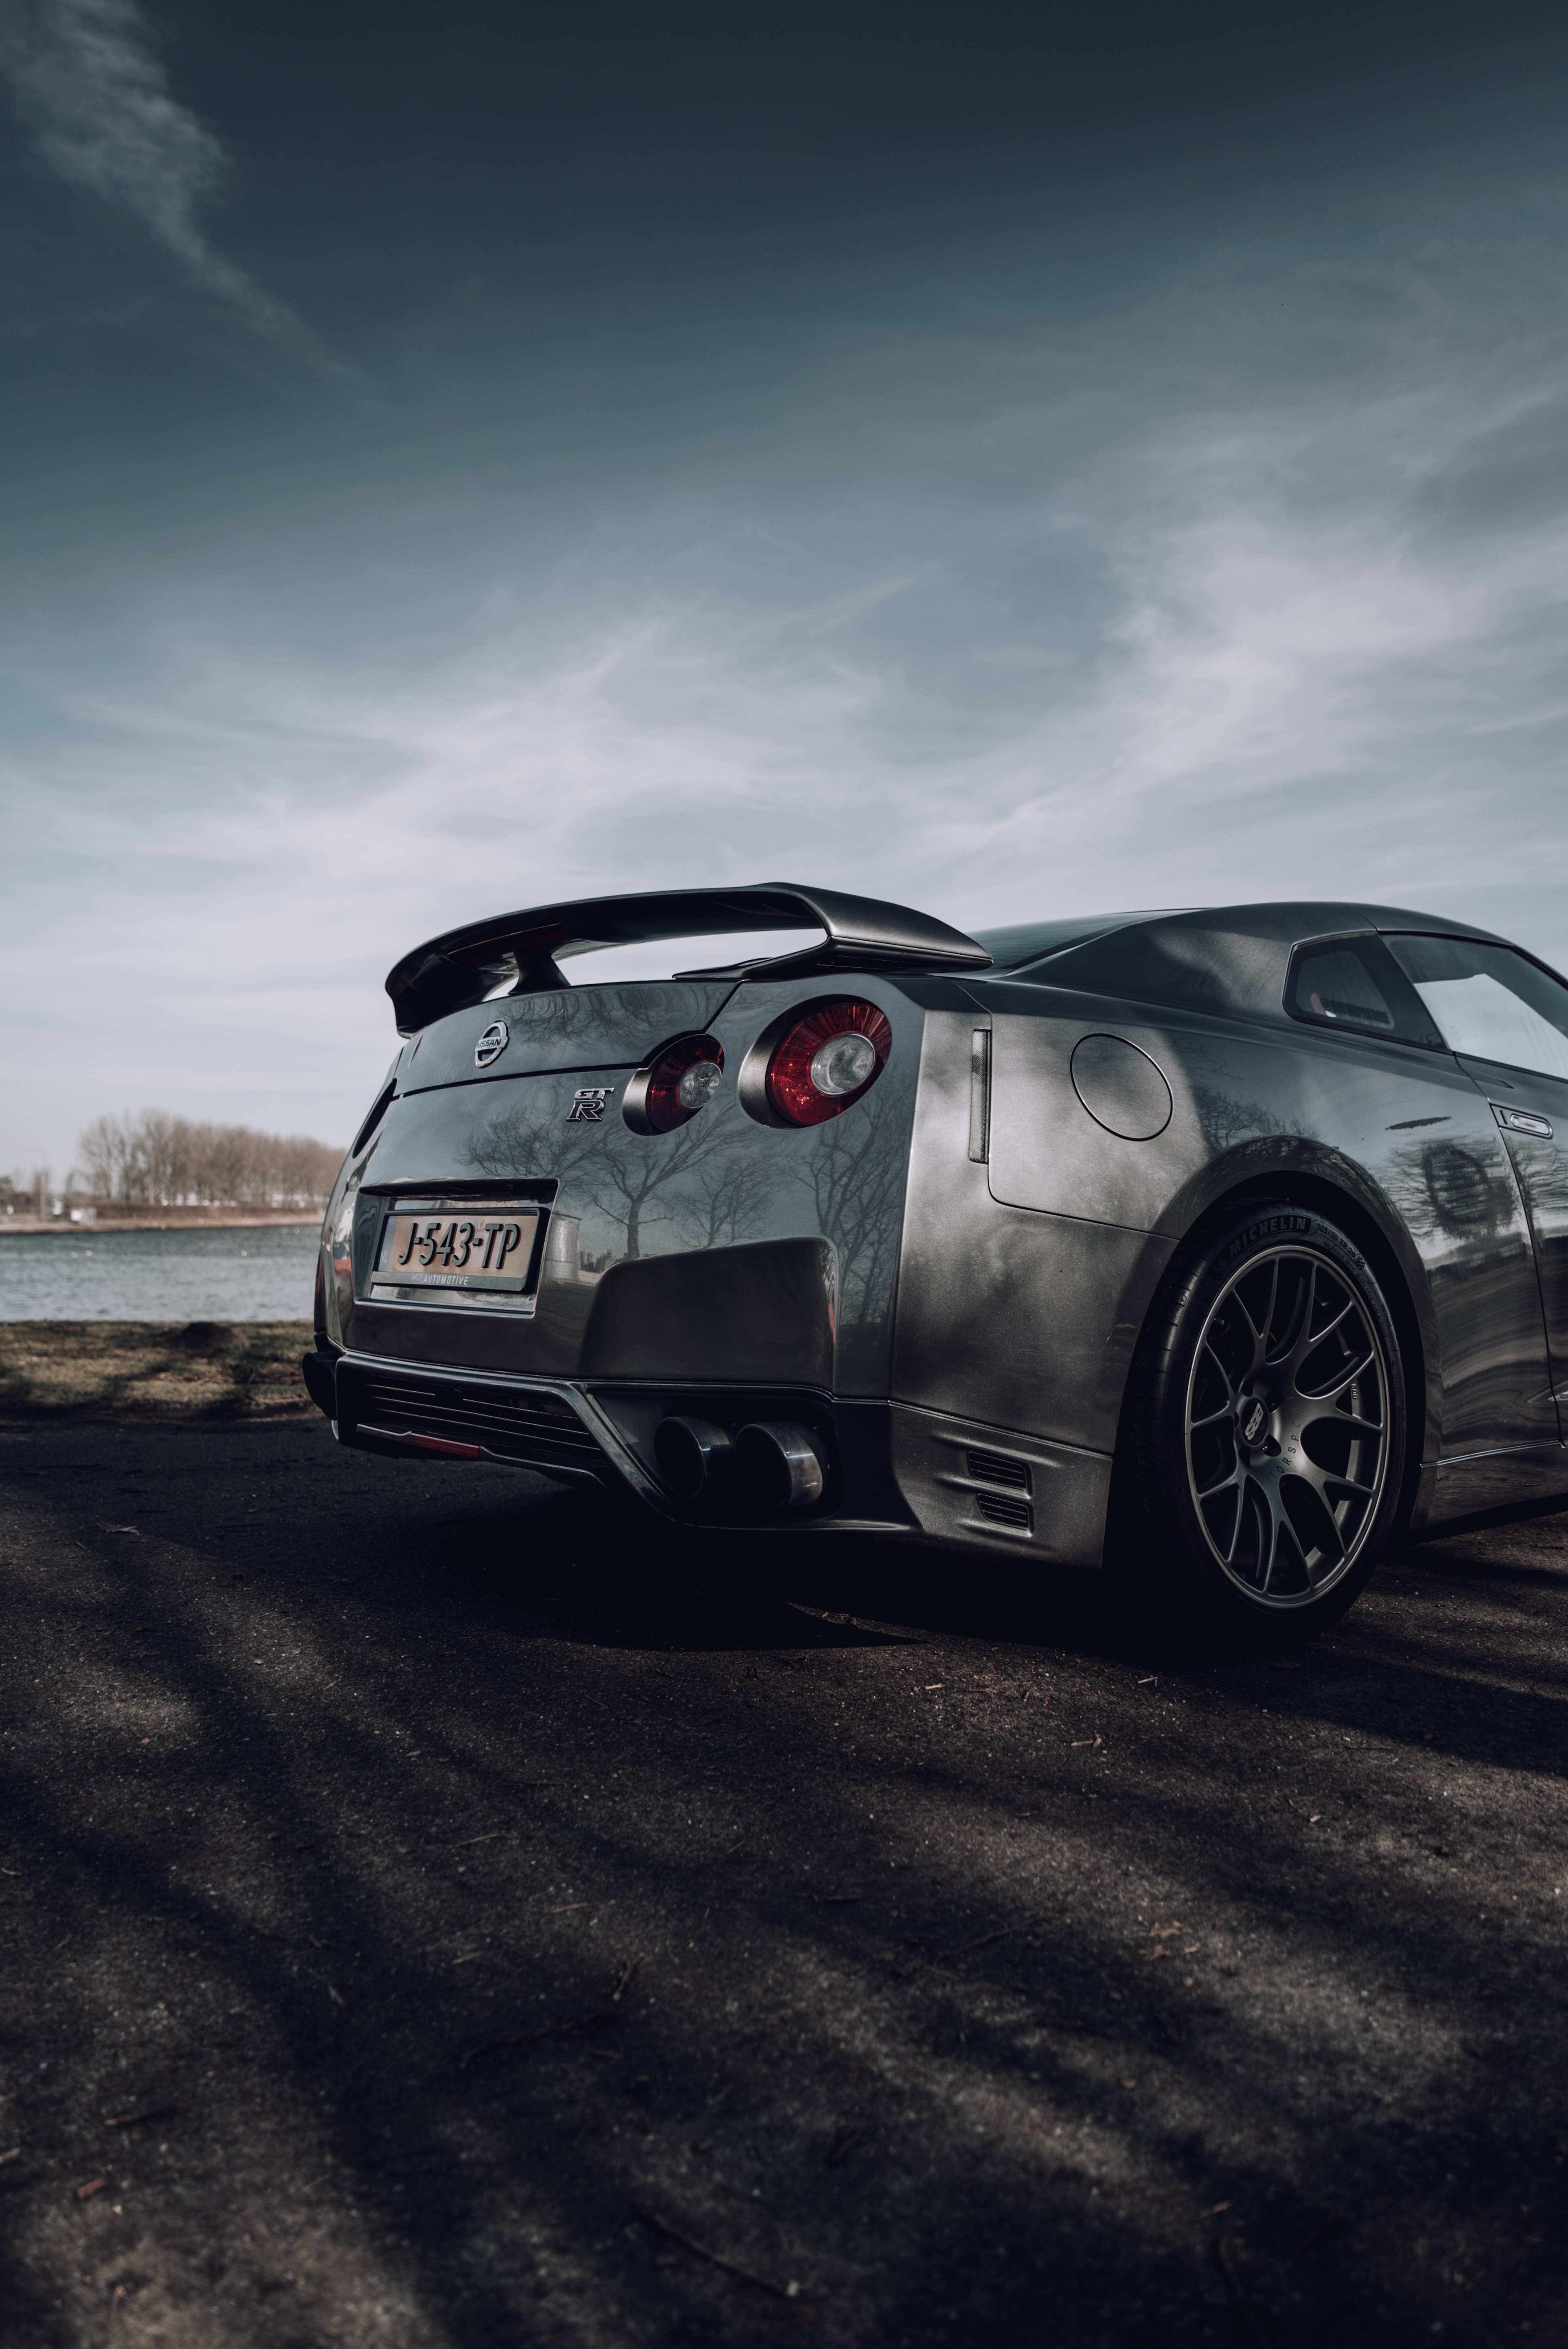 nissan, cars, road, car, side view, silver, nissan gt-r Smartphone Background